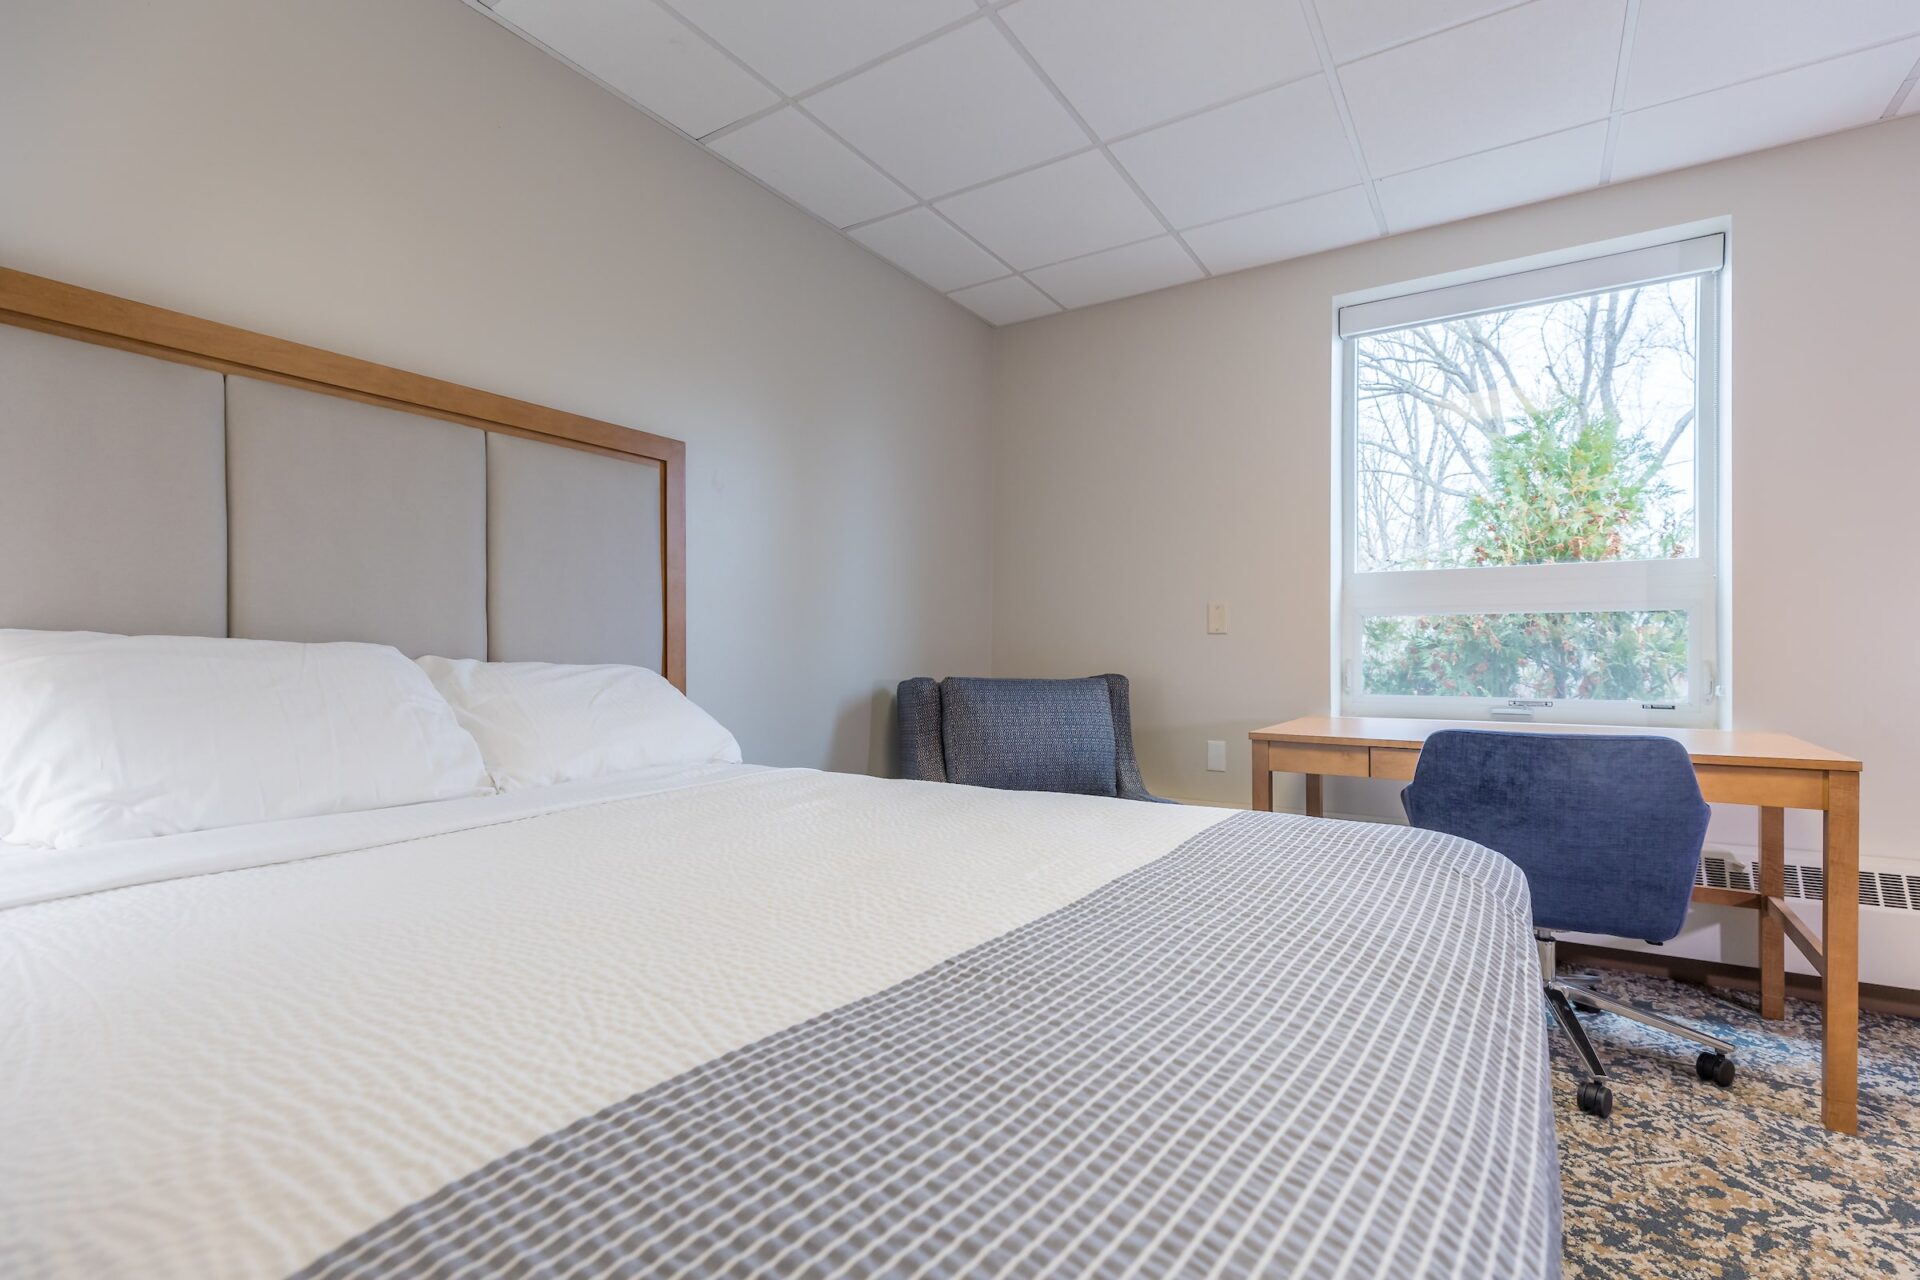 A bedroom at the Ridge Recovery Center in Windham, CT.